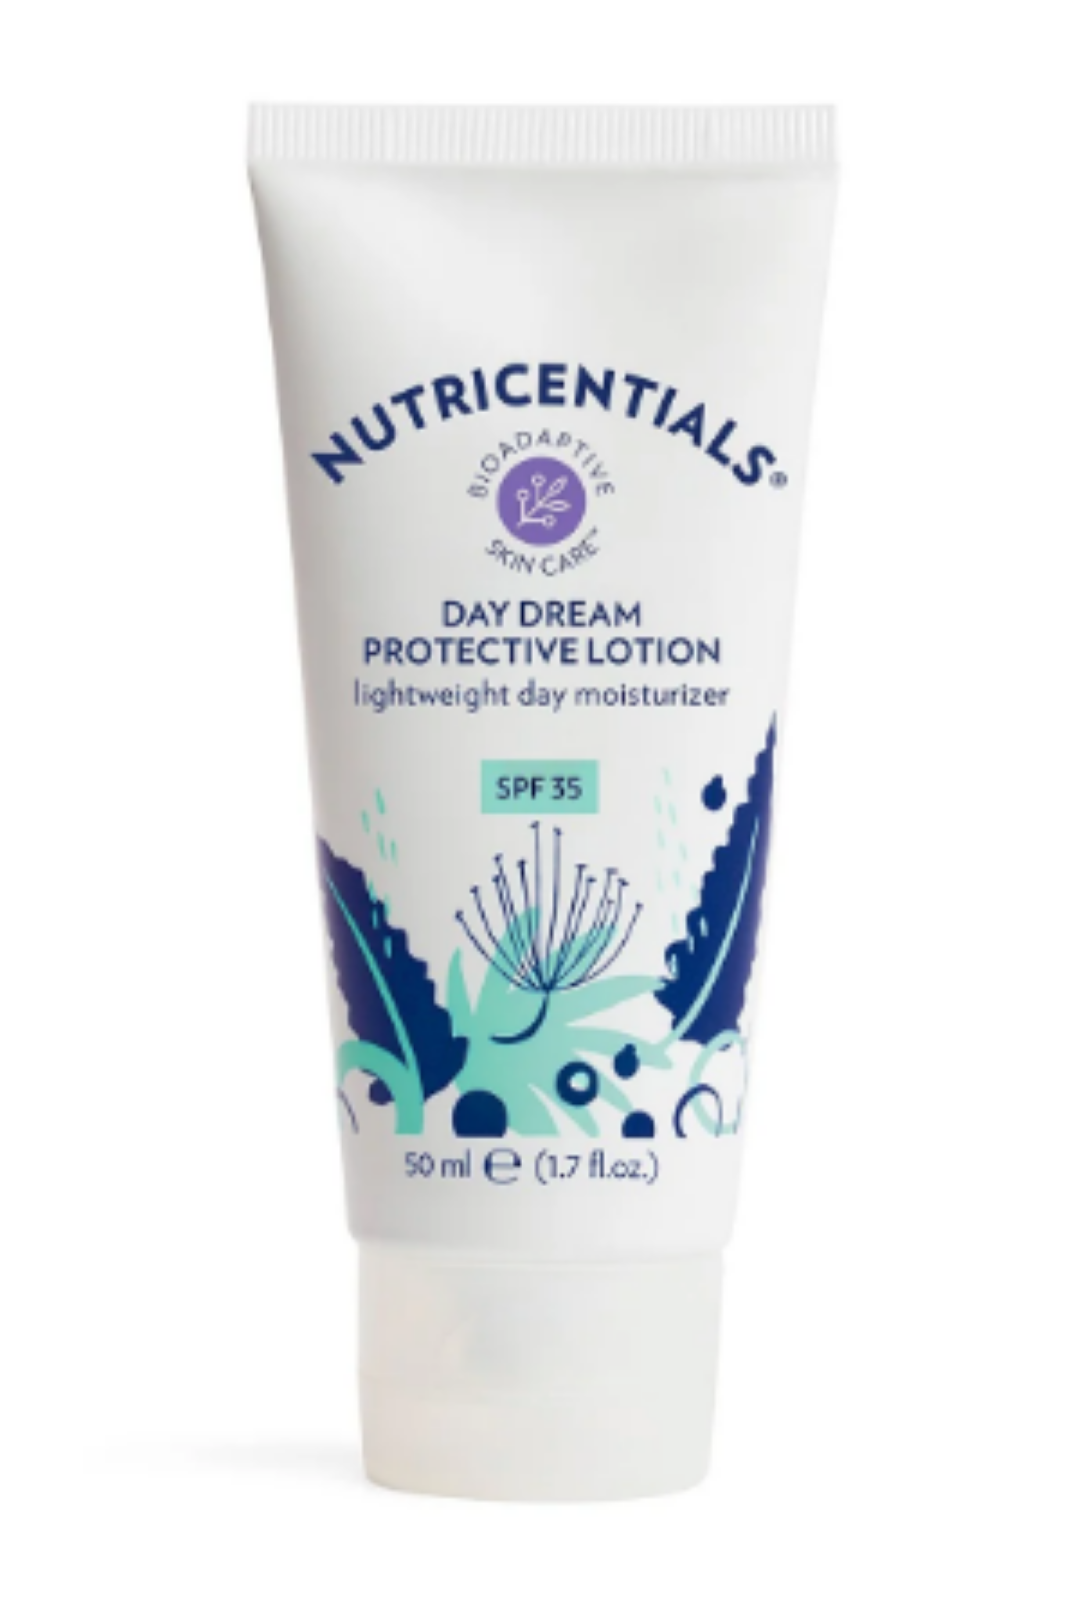 Day Dream Protective Lotion with SPF 35 -$5 off!